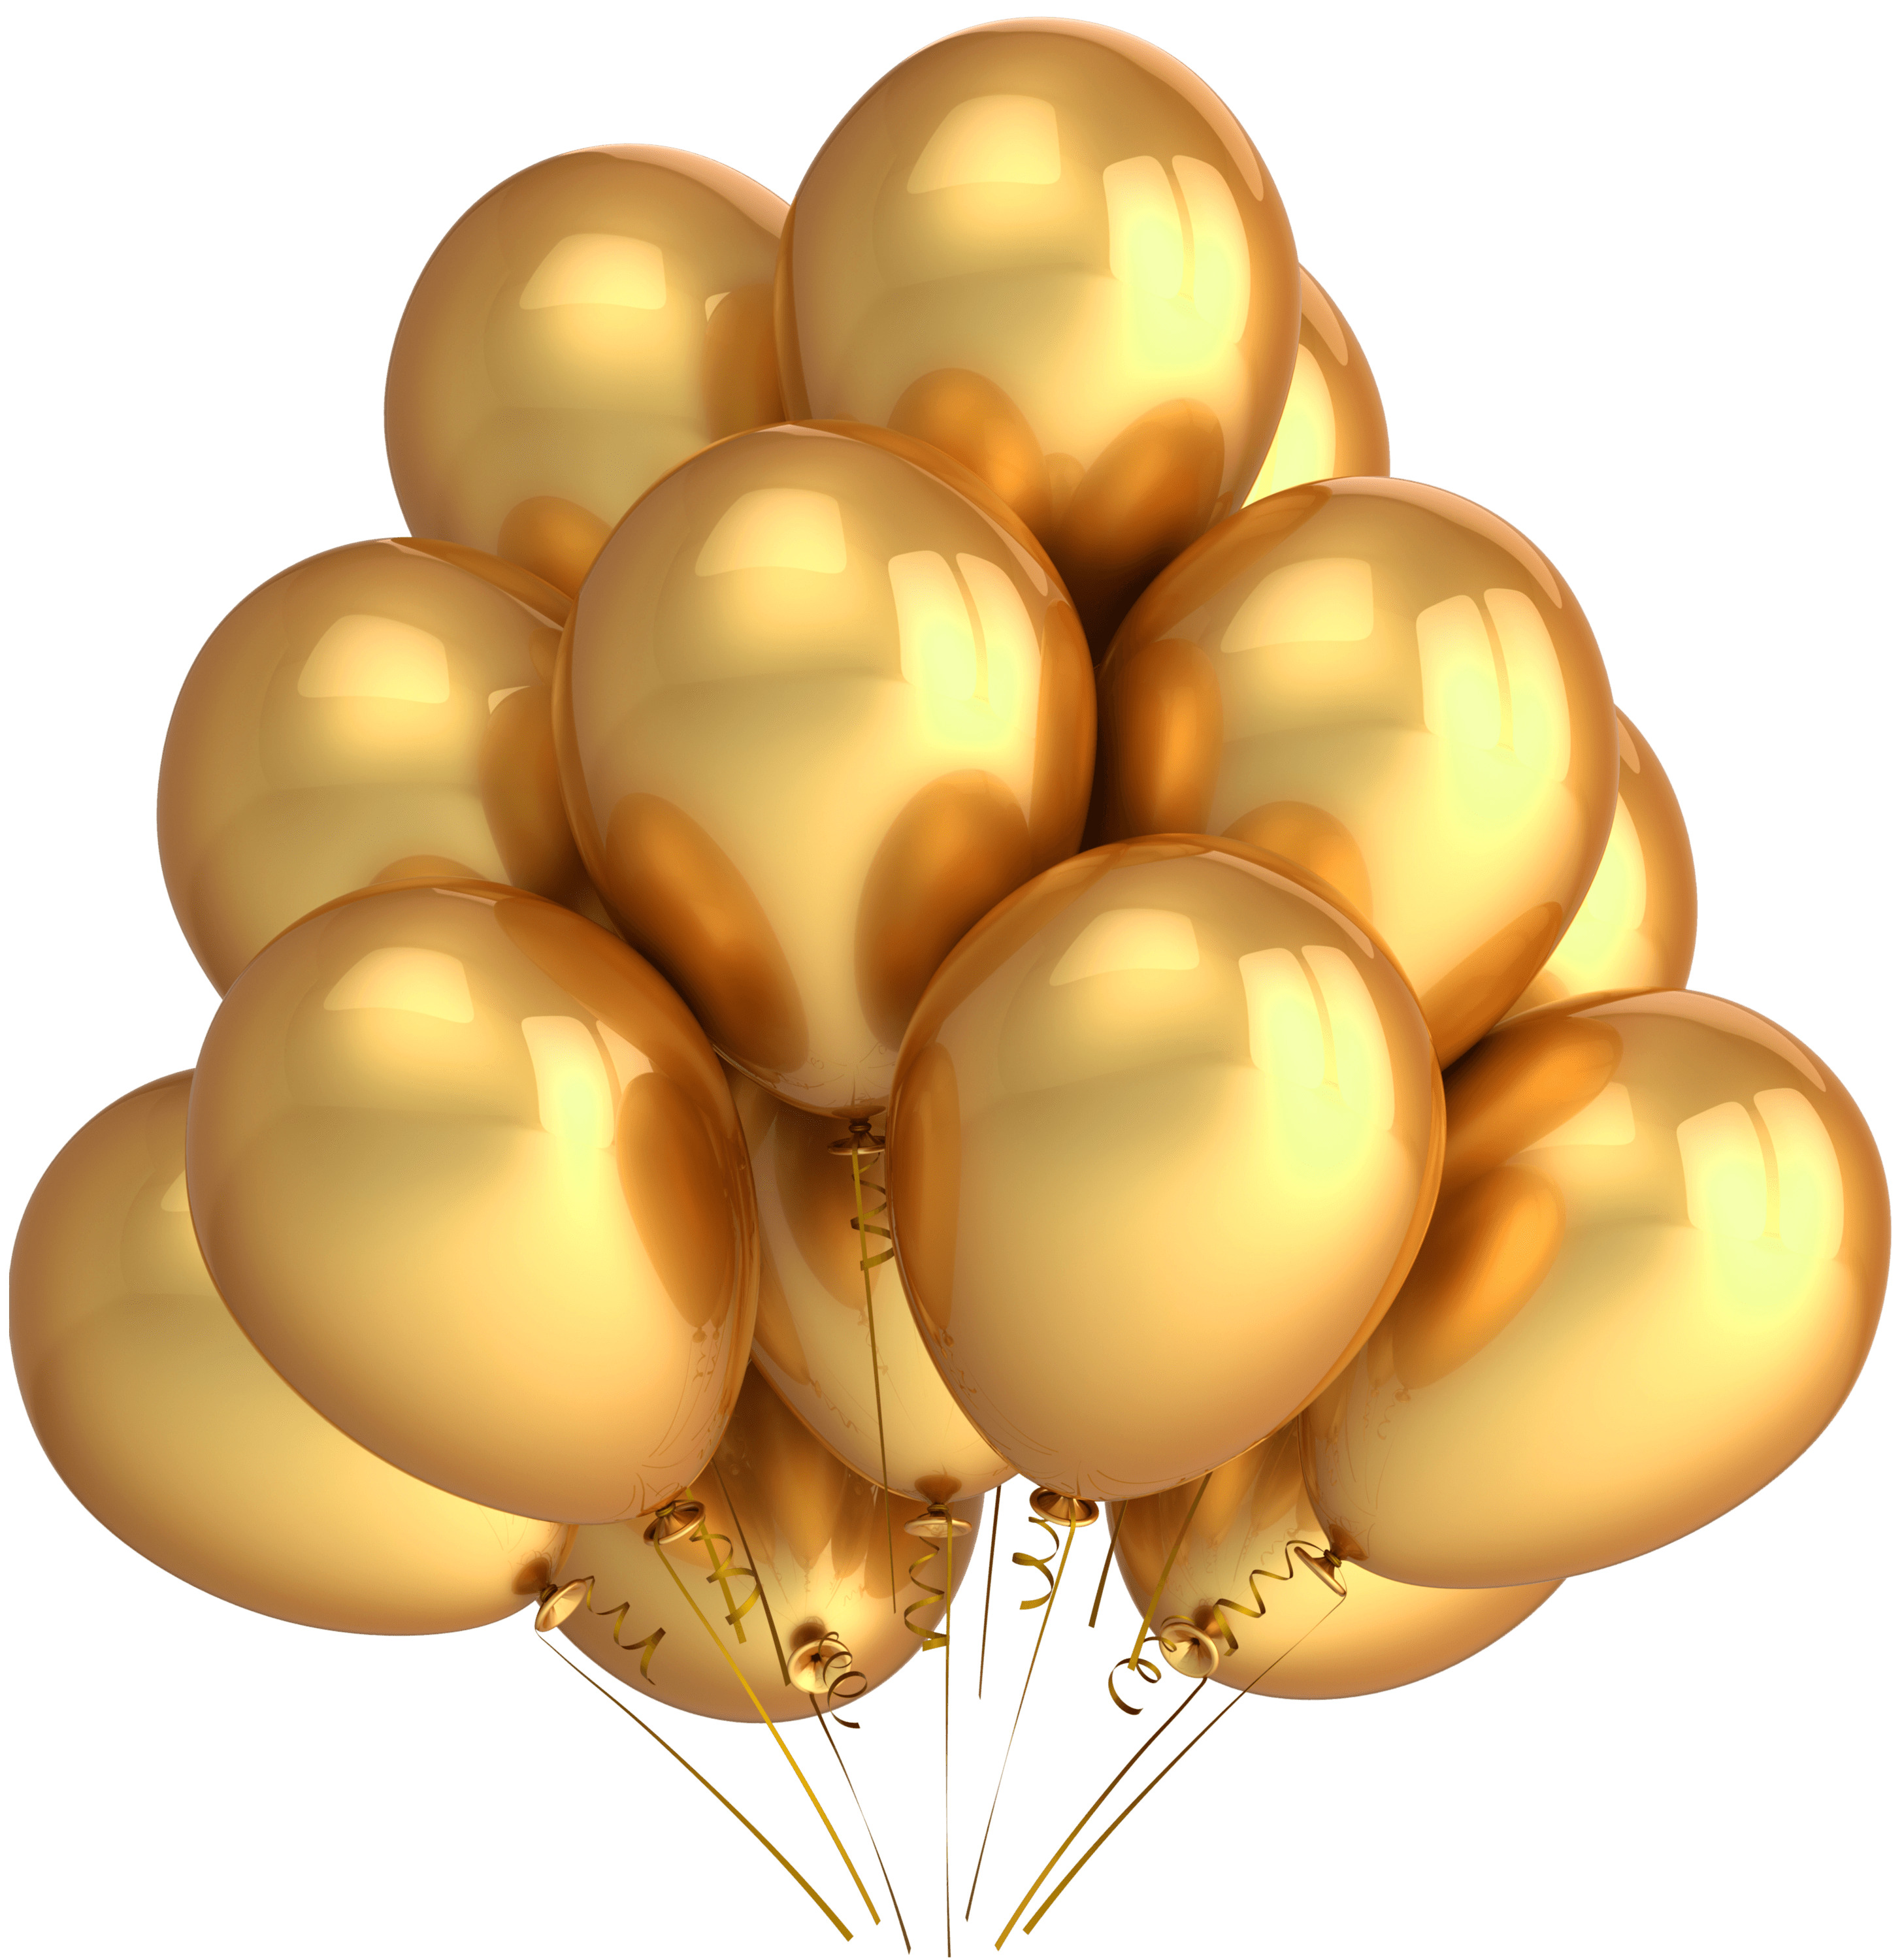 Golden Balloons icons